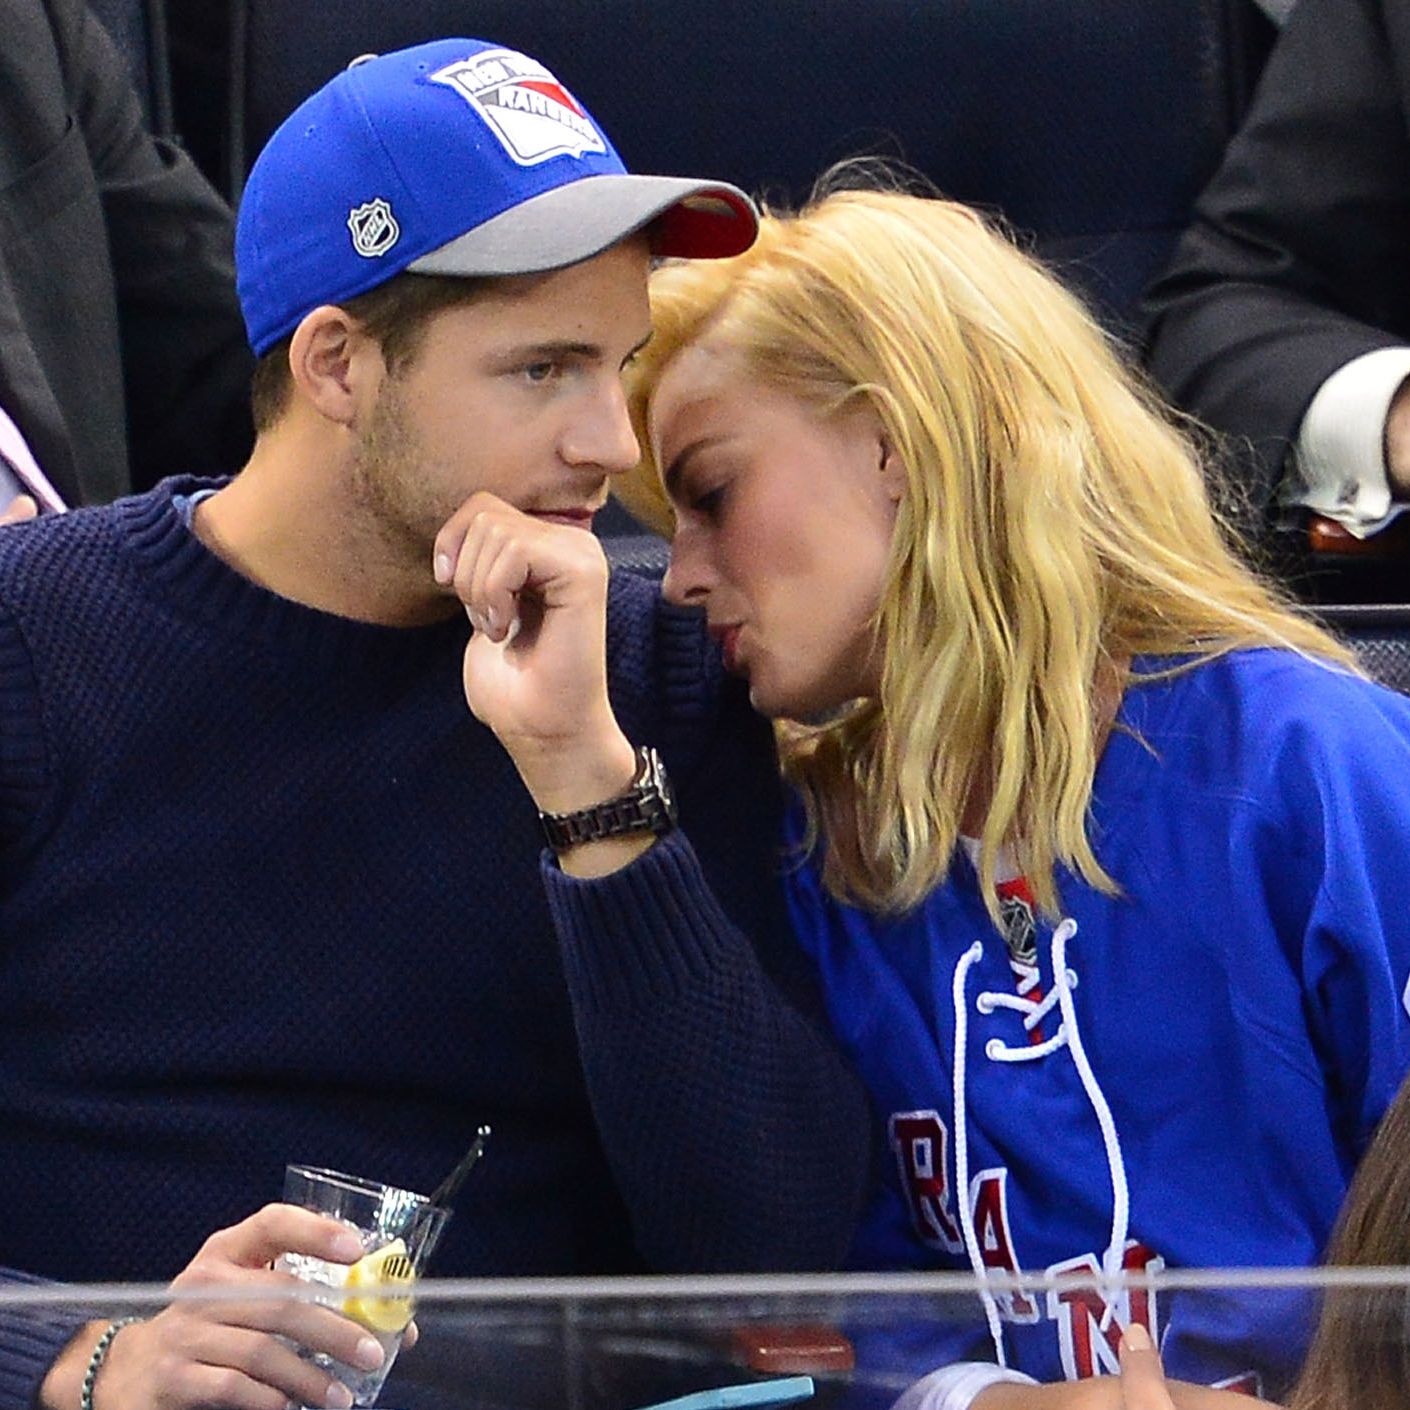 Margot Robbie and Husband Tom Ackerley's Low-Key Relationship Has Been High-Key Adorable This Entire Time